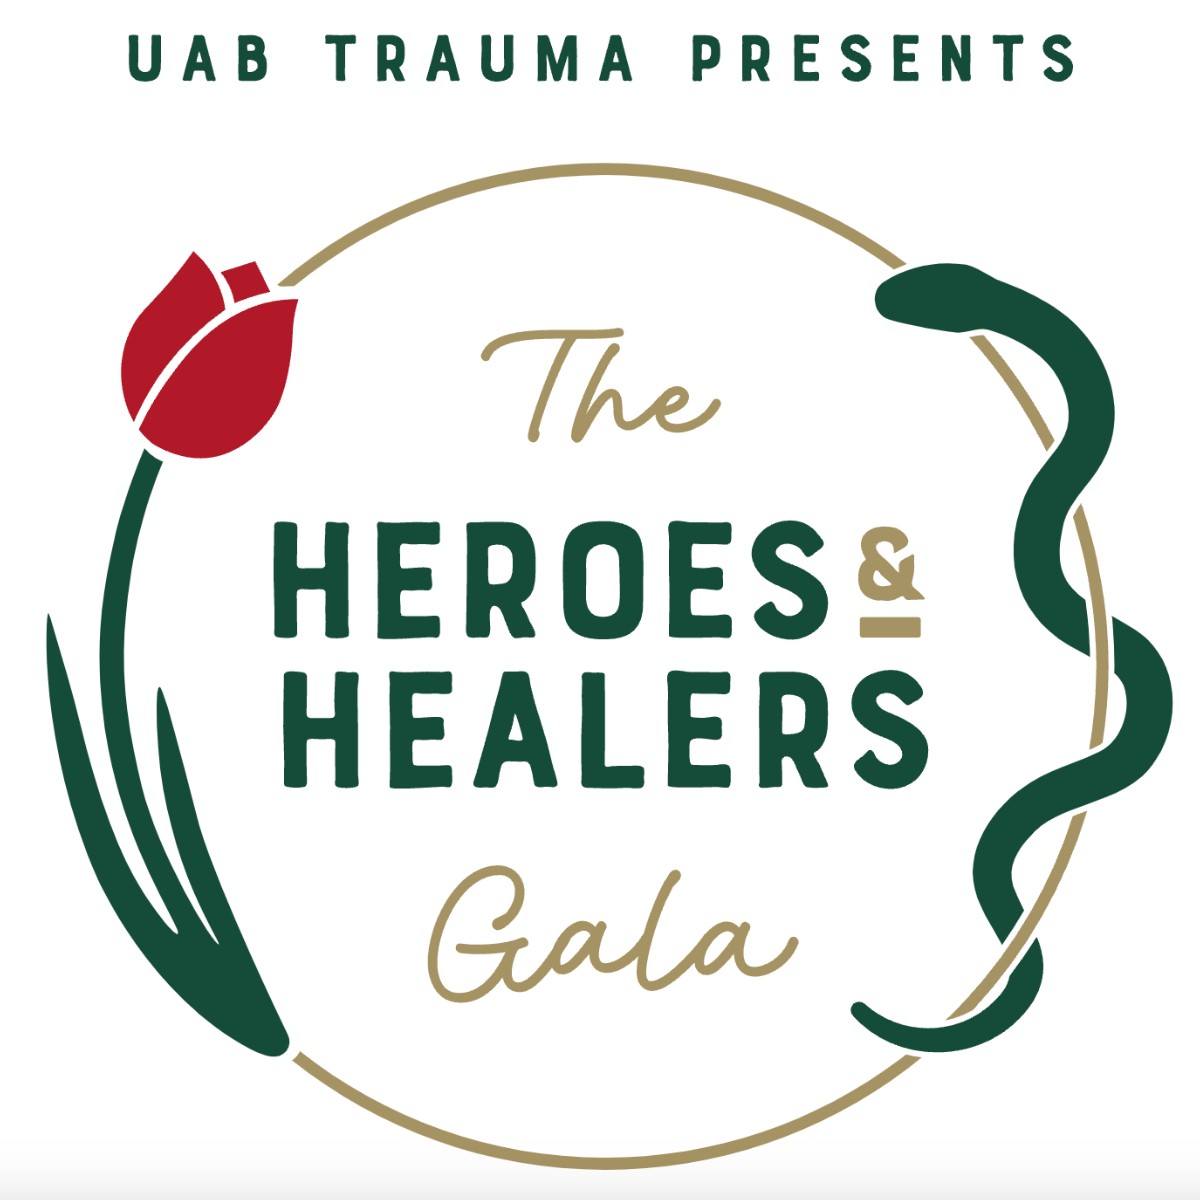 Join us at the inaugural Heroes & Healers Gala on Friday, May 3, from 6:30 – 9 p.m., hosted by @UABTrauma. Attendees can use the code EARLY25 until April 5 for $5 off their ticket. Buy tickets or donate at brnw.ch/21wIhas